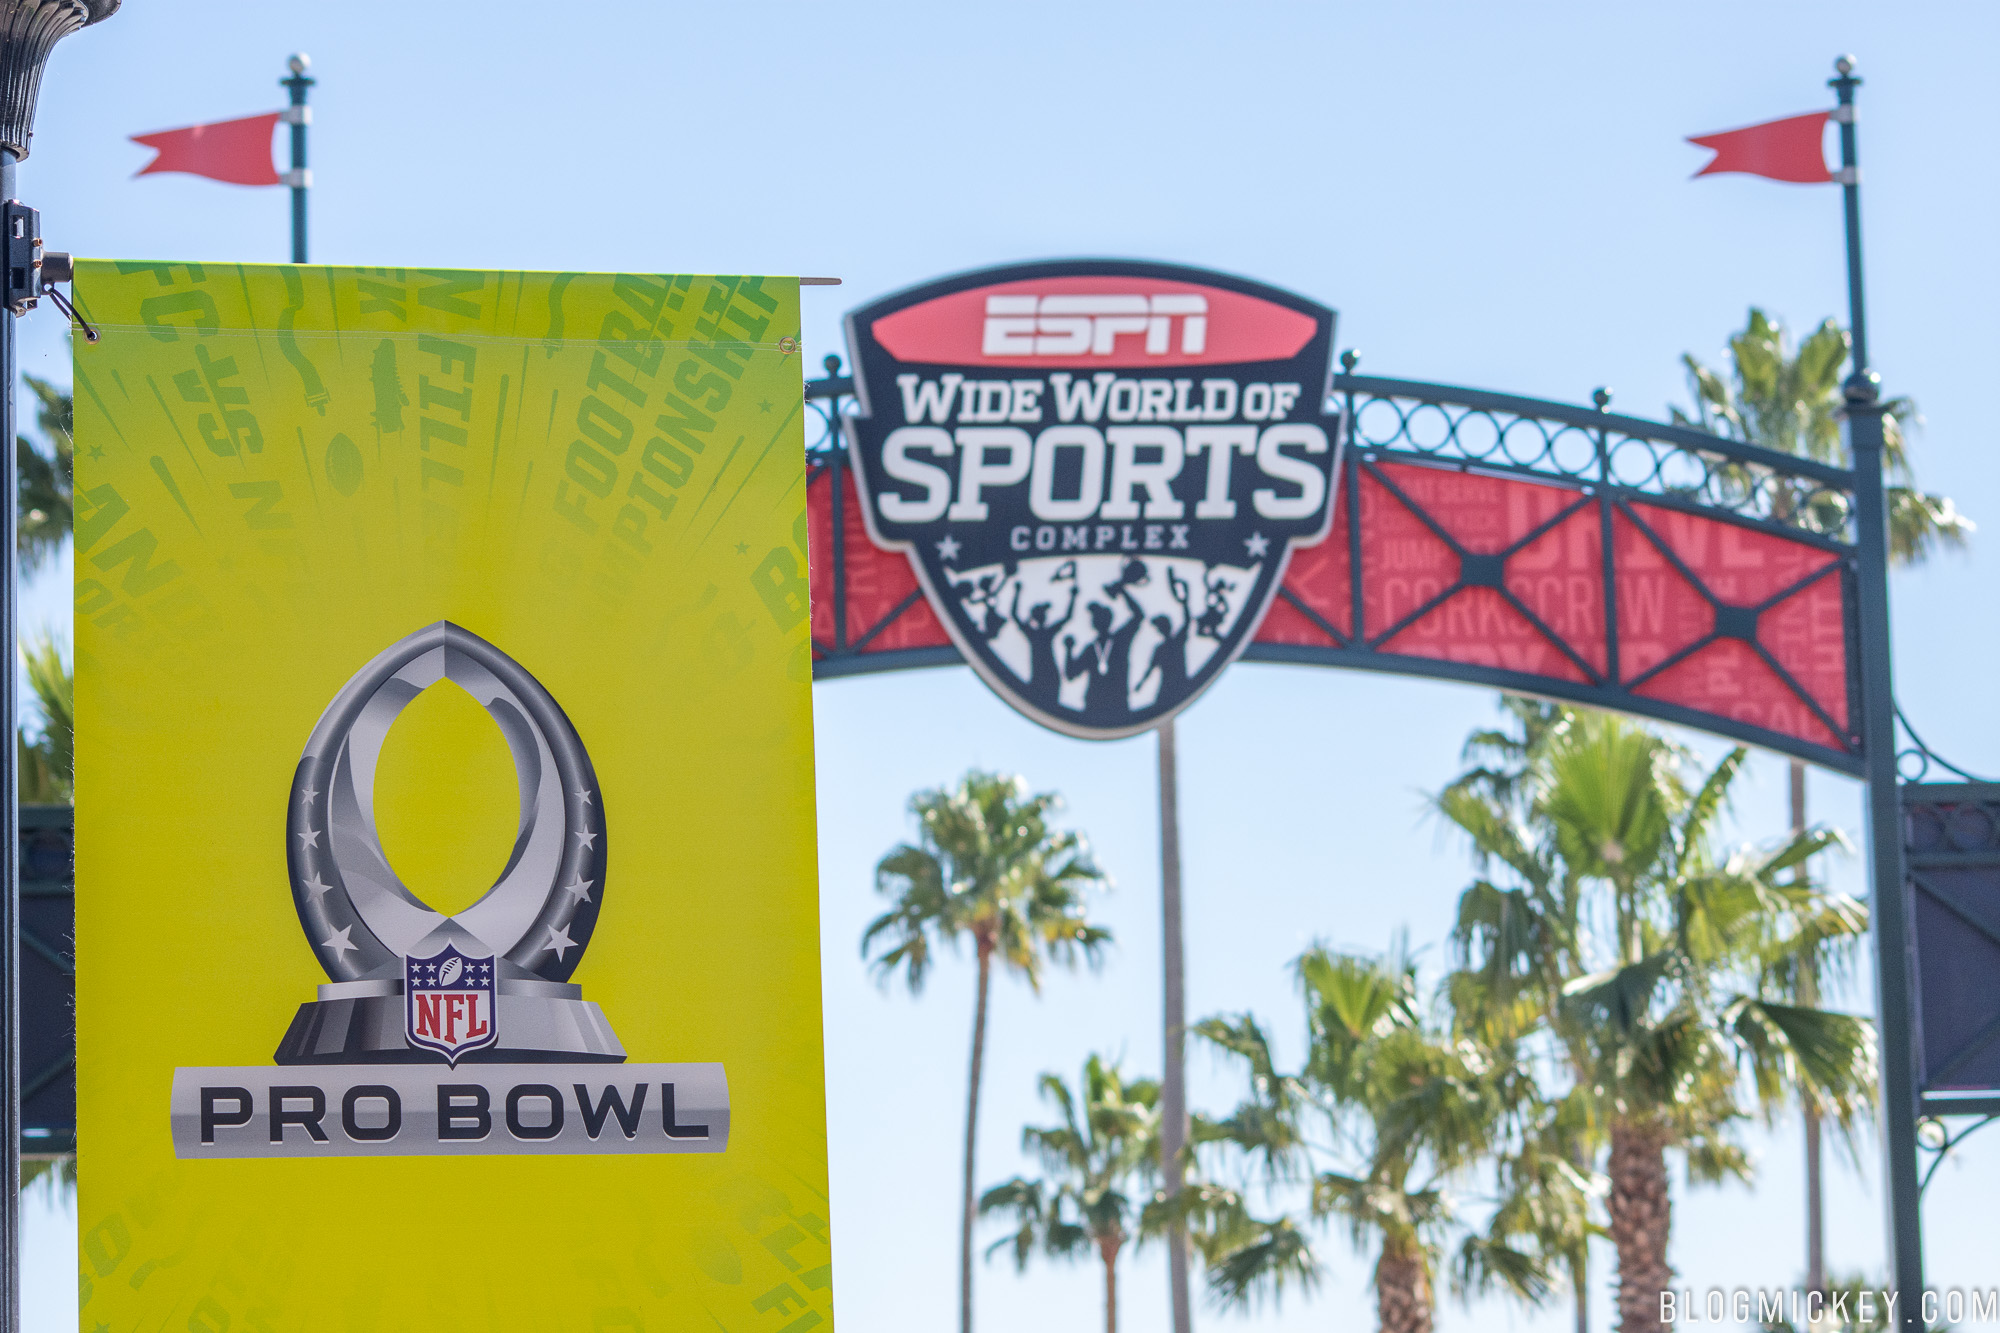 PHOTOS: NFL Pro Bowl Week Comes to ESPN Wide World of Sports - Blog Mickey2000 x 1333